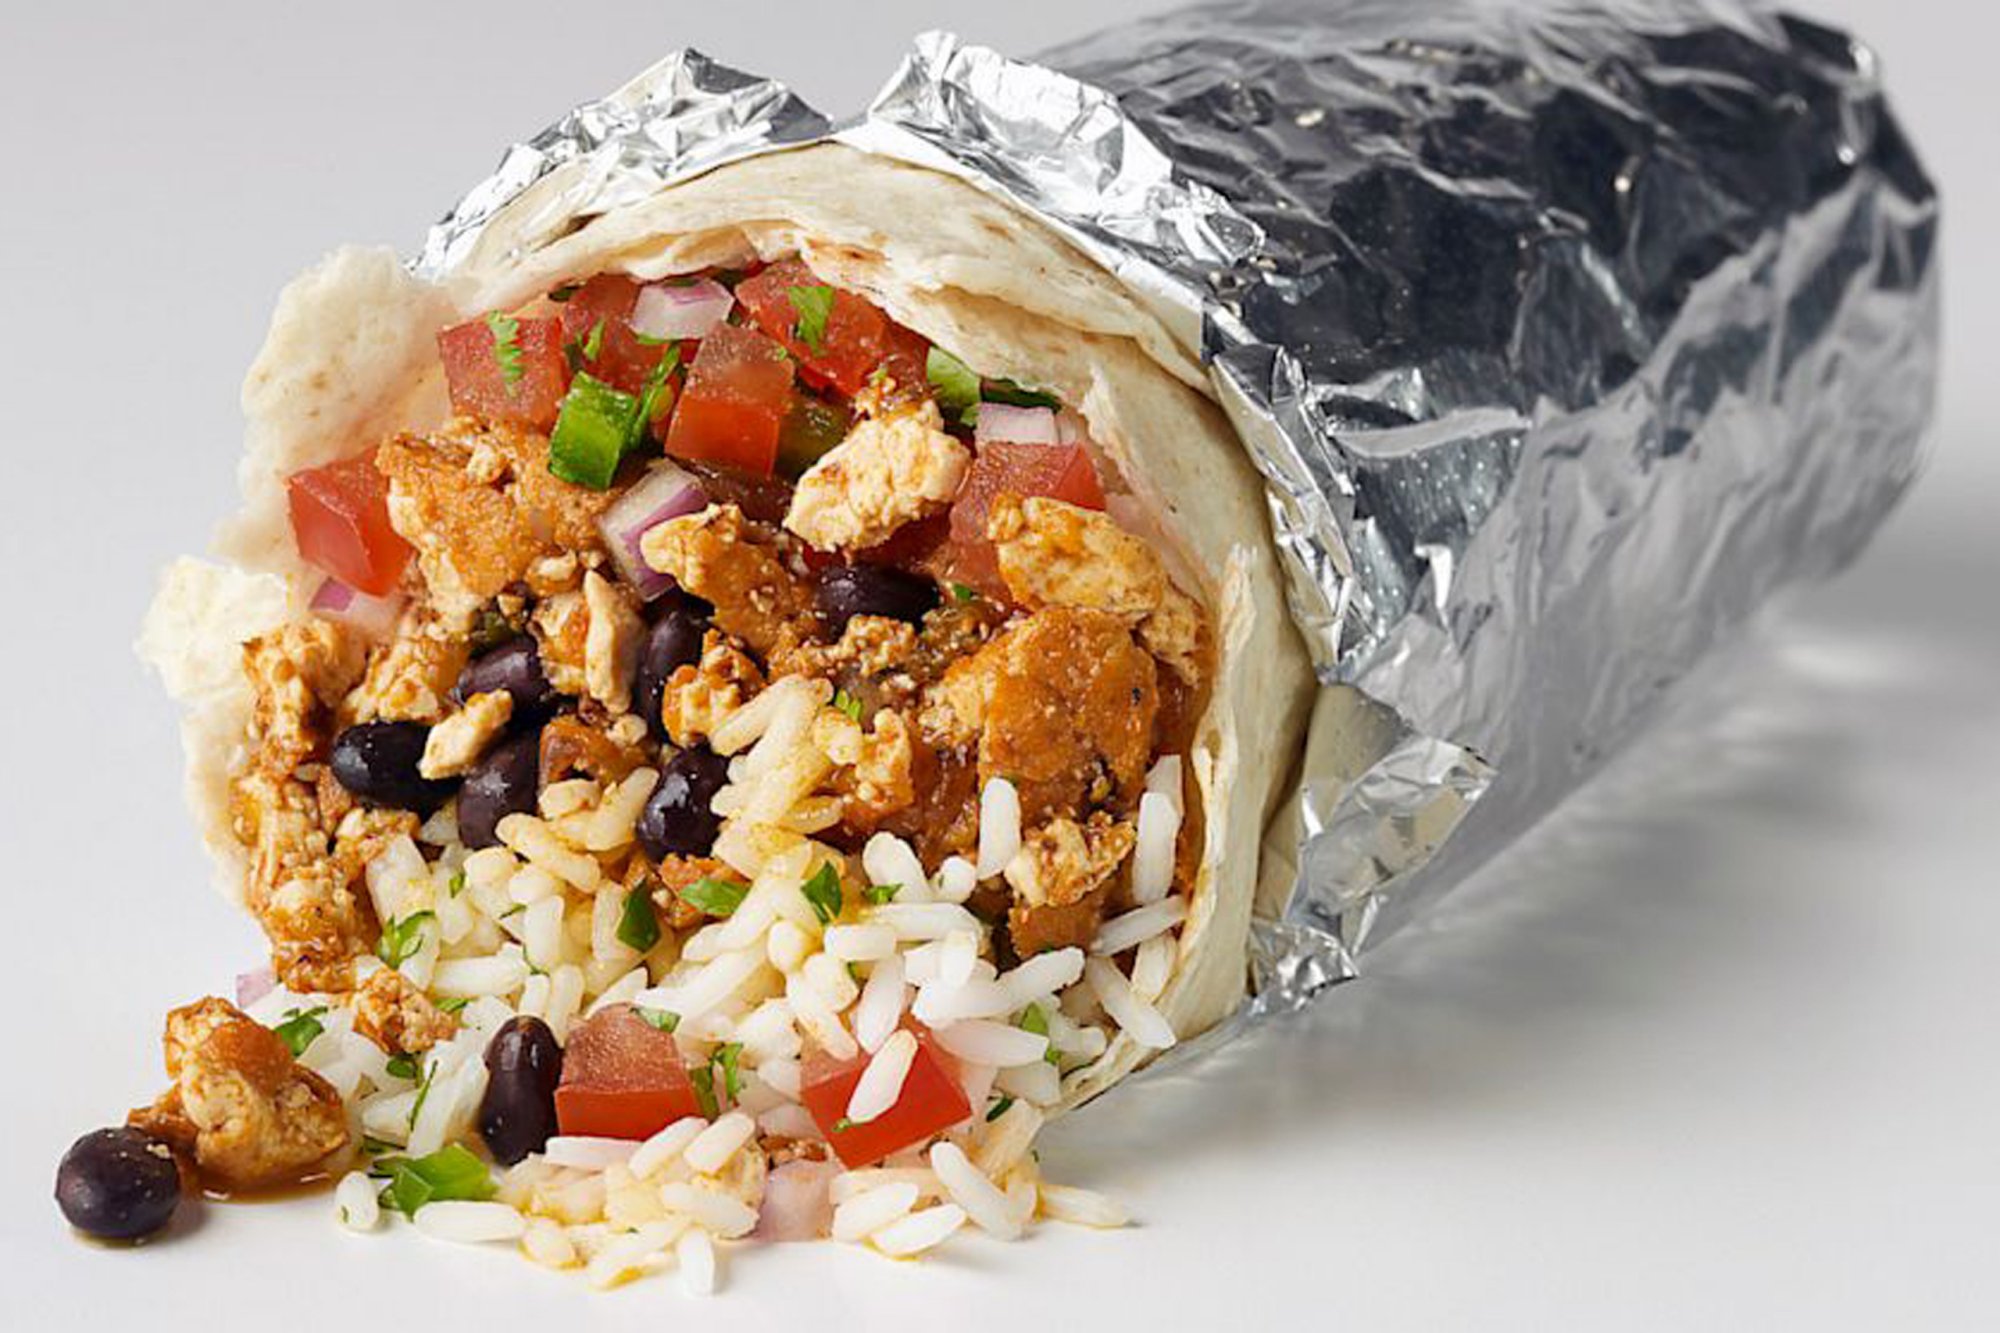 How To Get FREE Chipotle